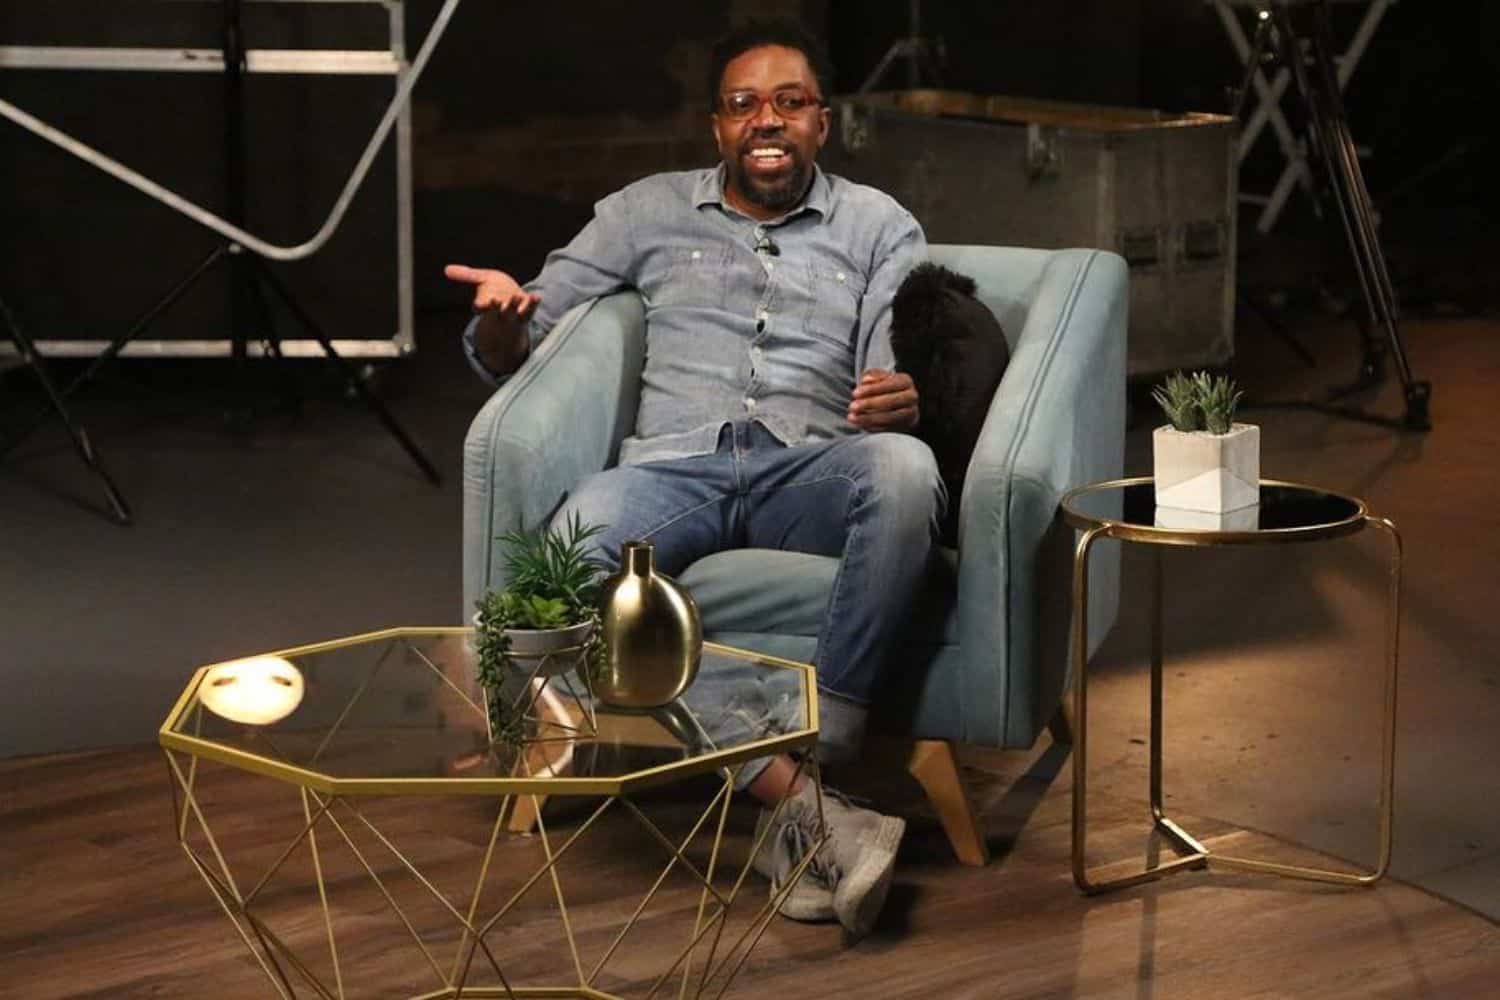 Kagiso Lediga: ‘SA is the comedy gift that keeps giving’ ahead of roasting country in comedy show [Video]